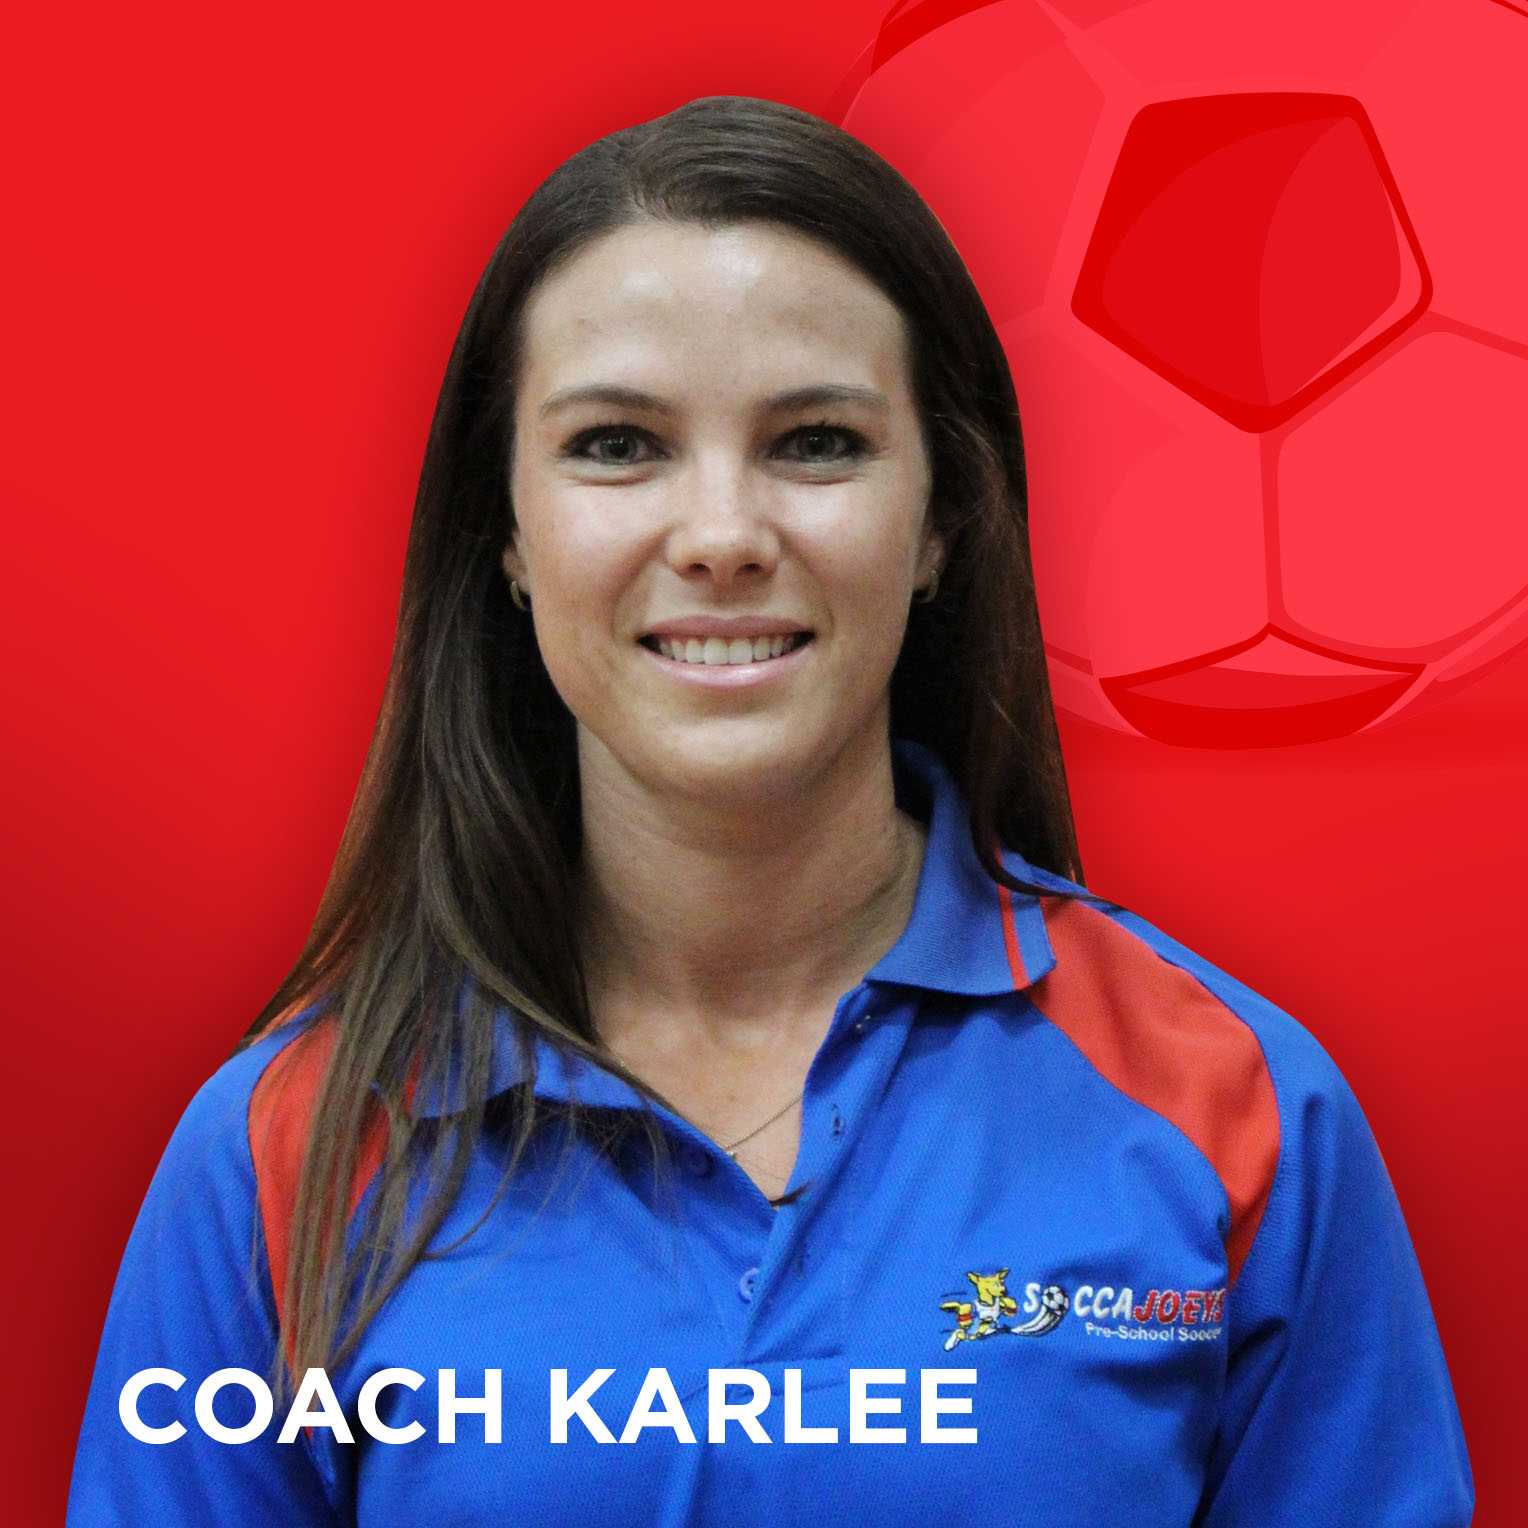 early childhood education soccer coach karlee